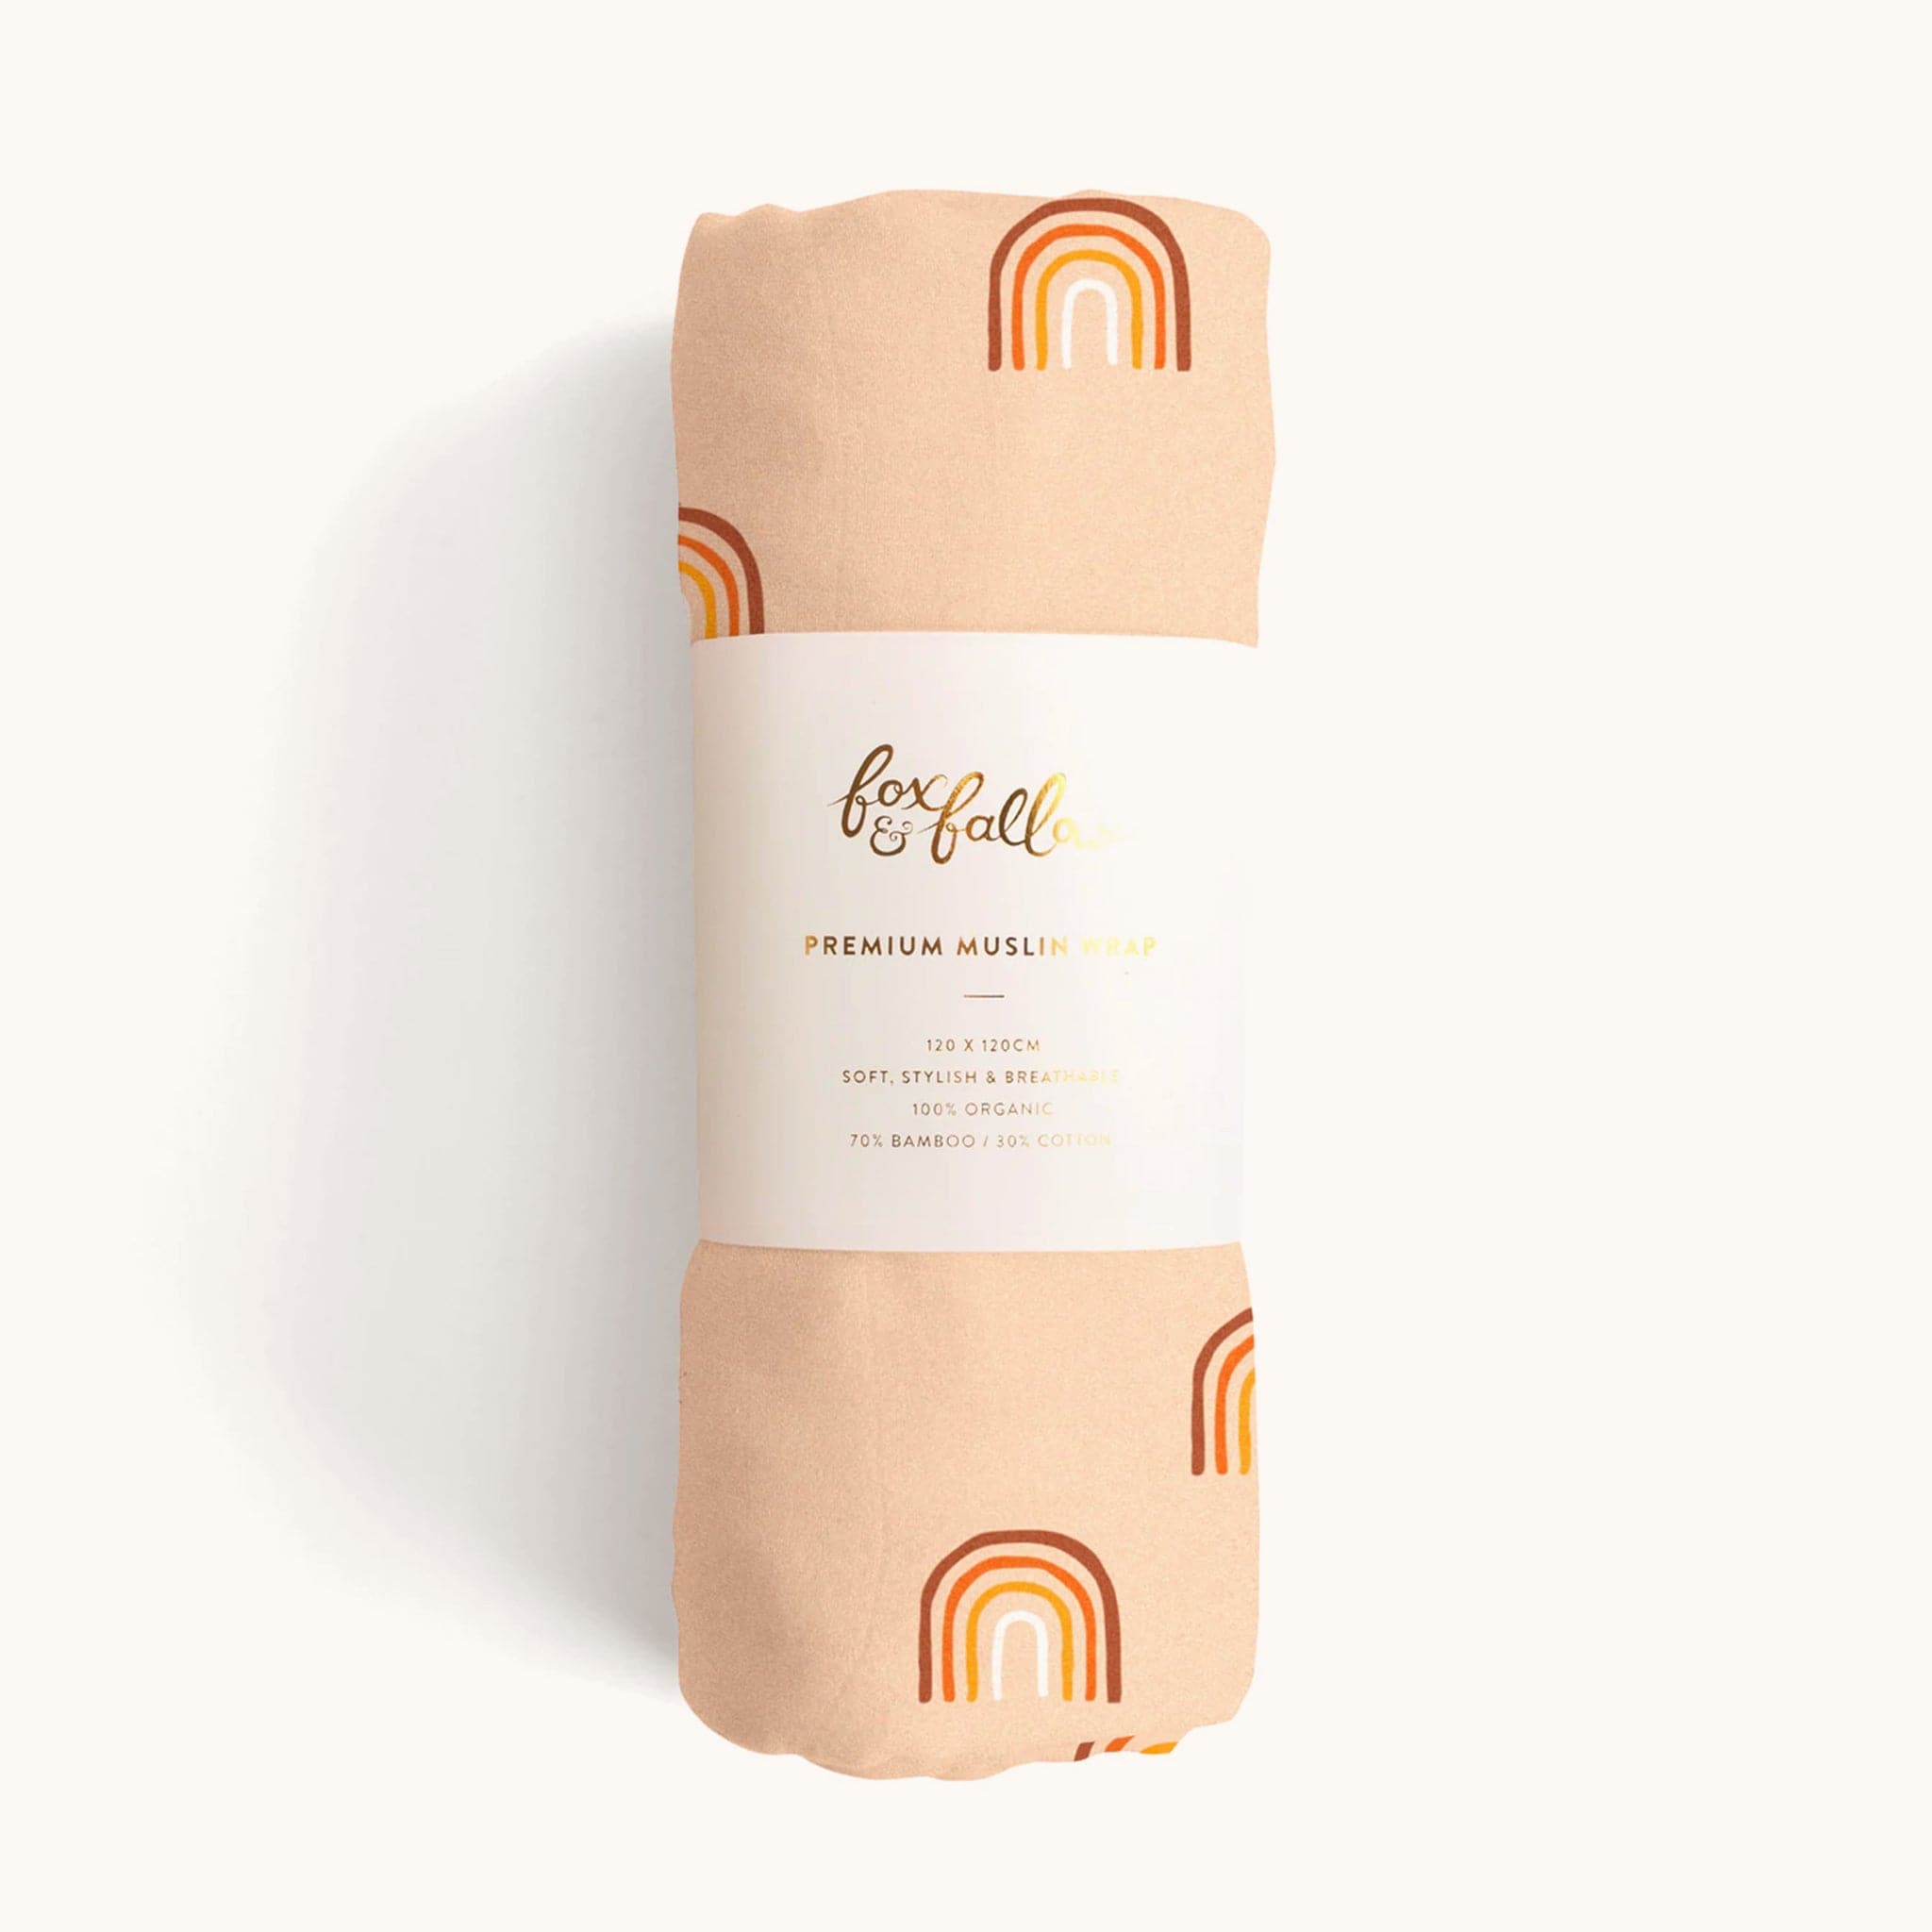 Peach swaddle covered in a warm toned rainbow pattern wrapped in white packaging that reads &#39;fox and follow, premium muslim wrap&#39; in gold foil text. 